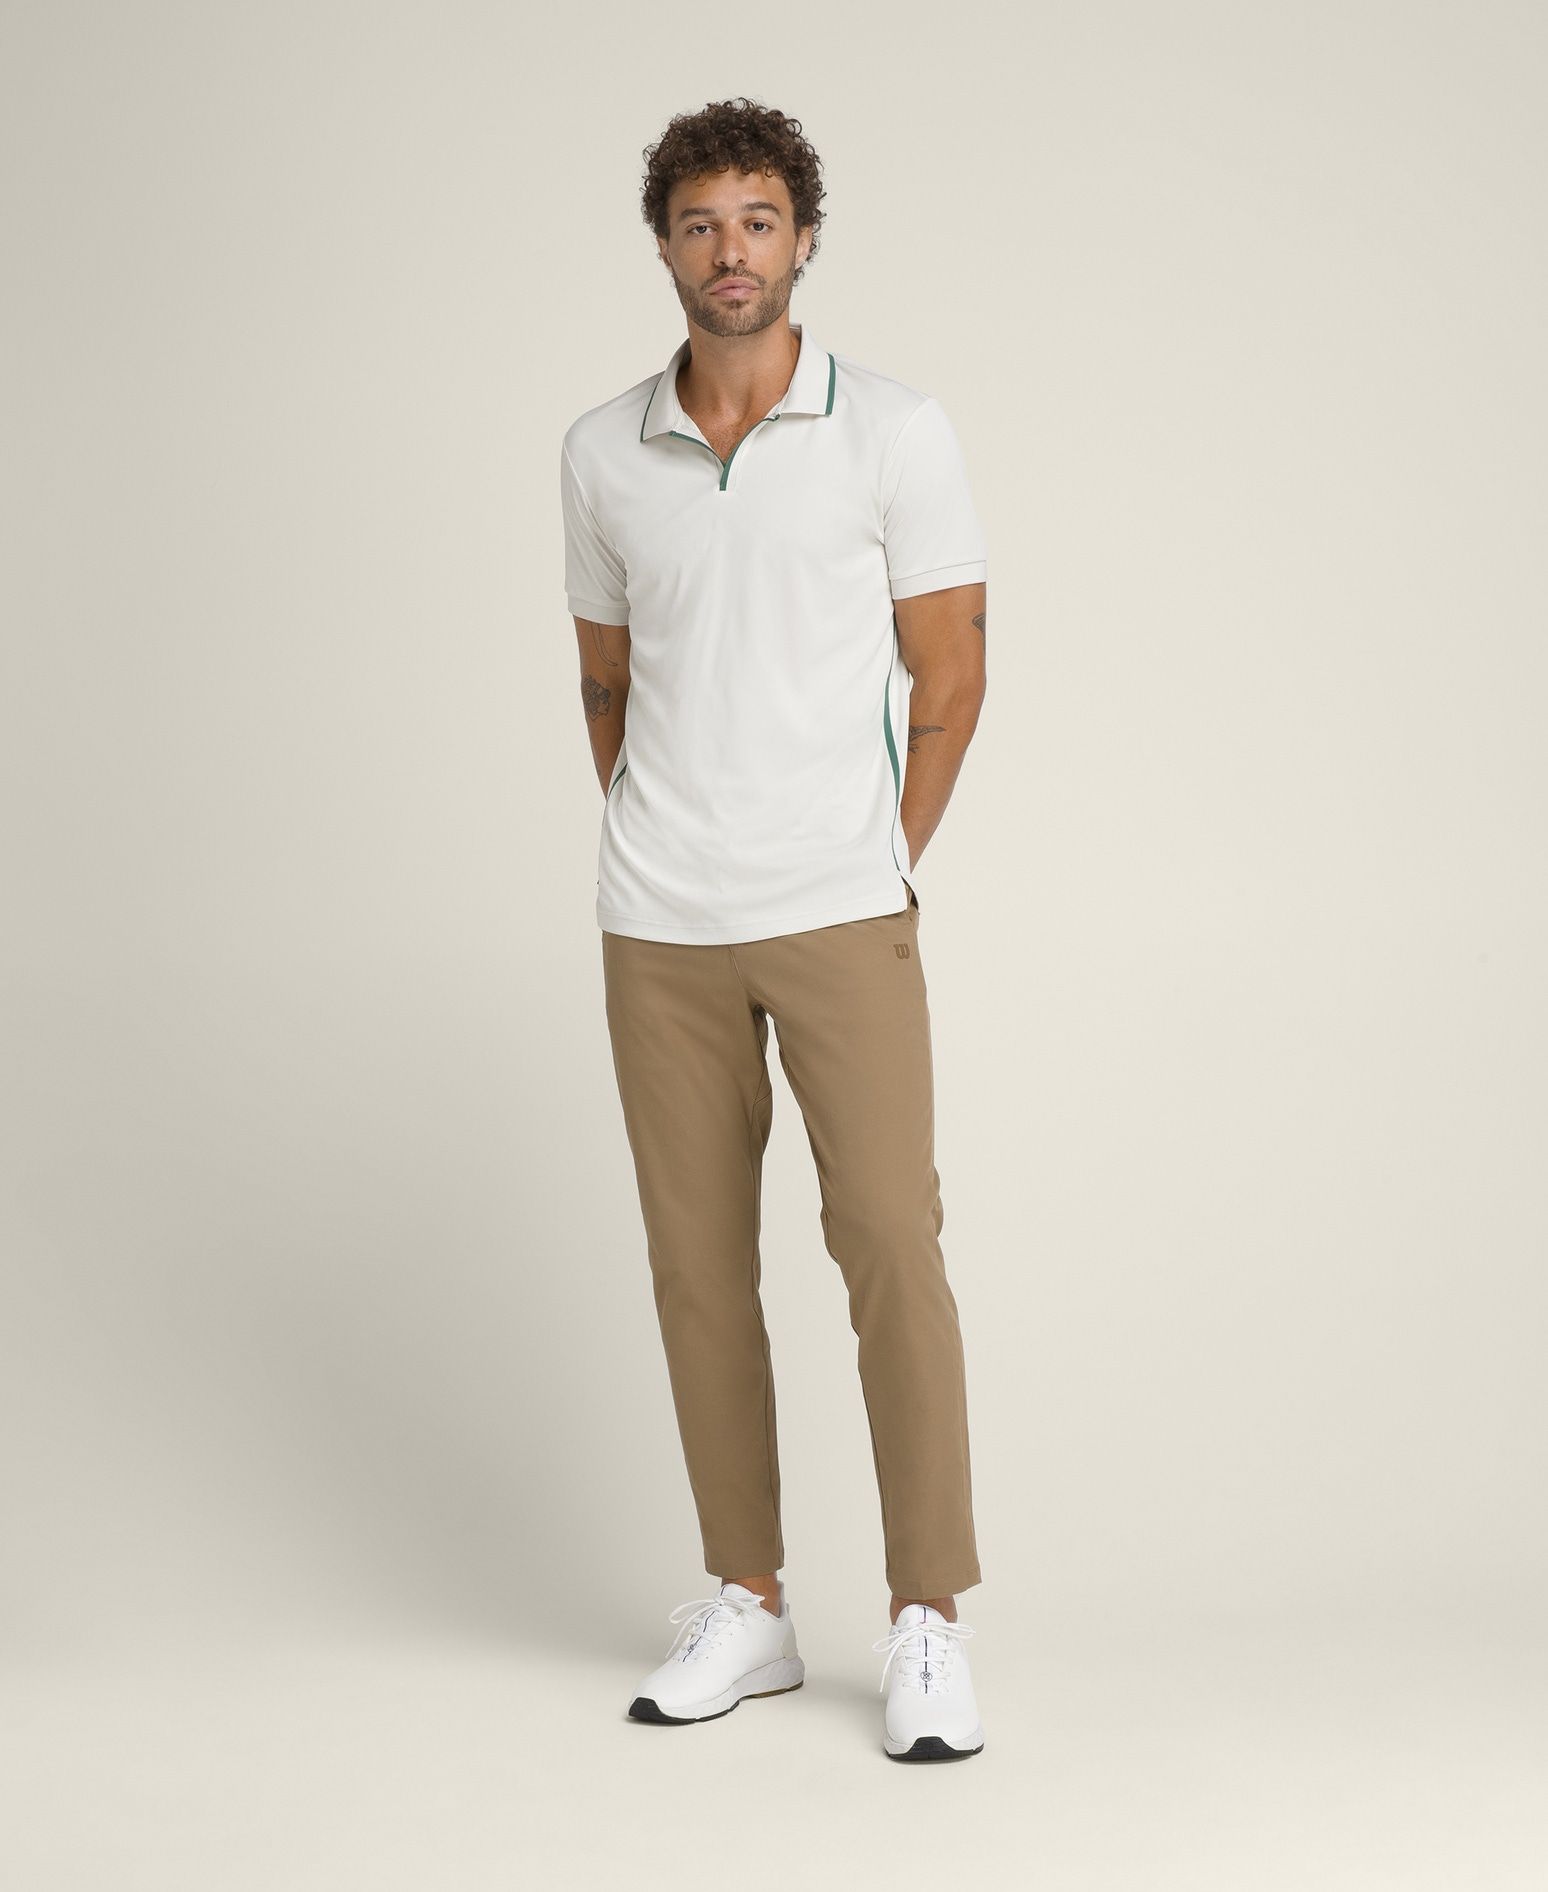 Your adidas slimfit golf trousers are waiting  adidas UK